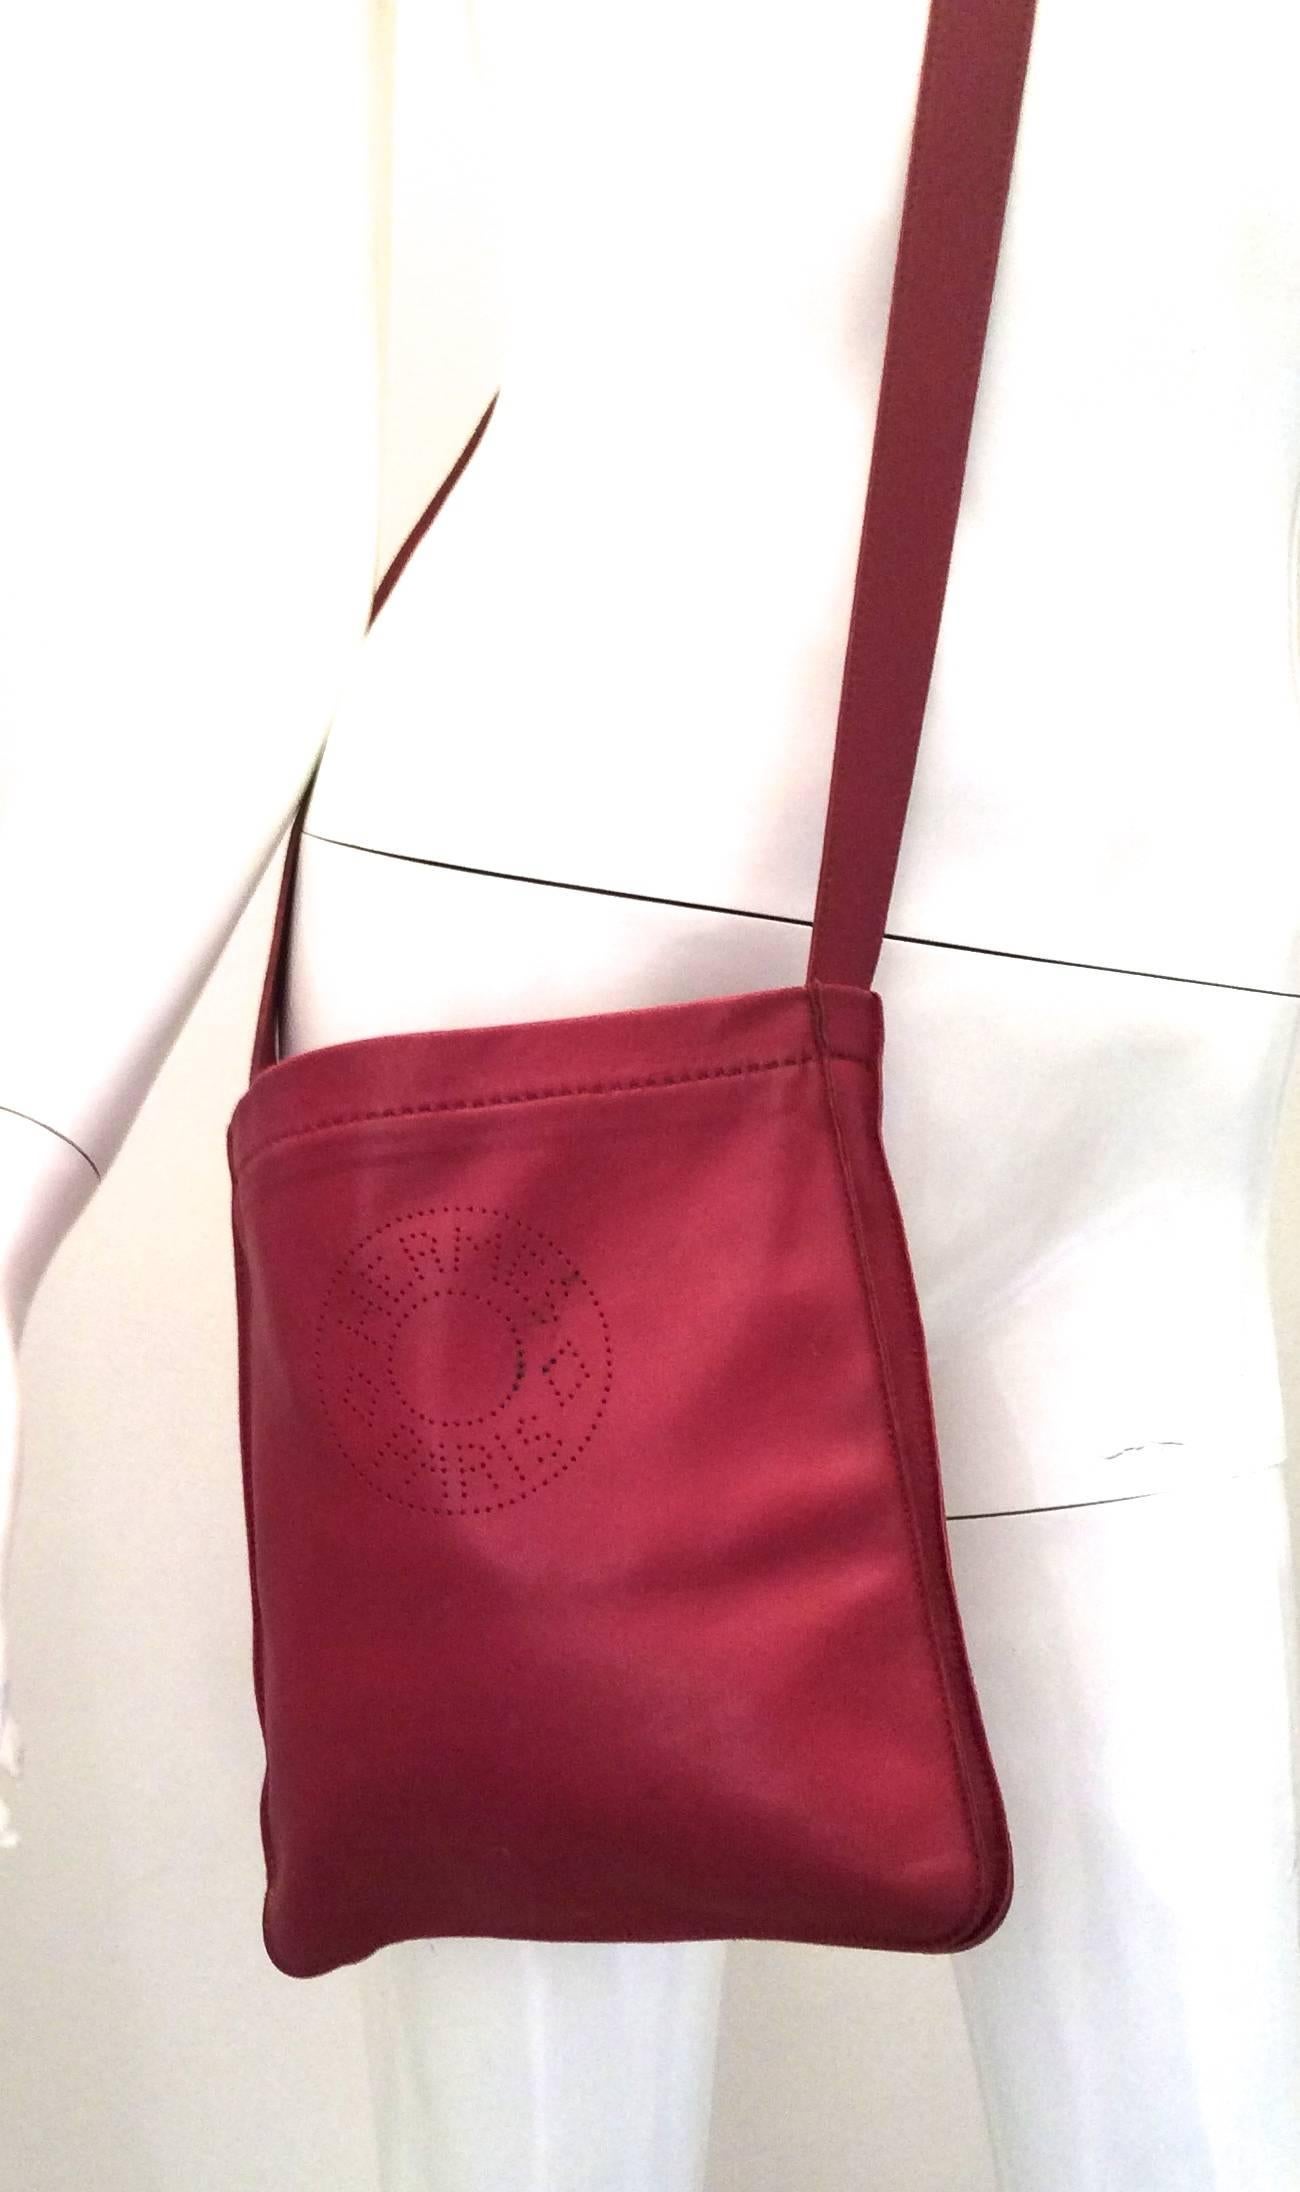 Hermes Crossbody Purse - Red Leather  In Good Condition For Sale In Boca Raton, FL